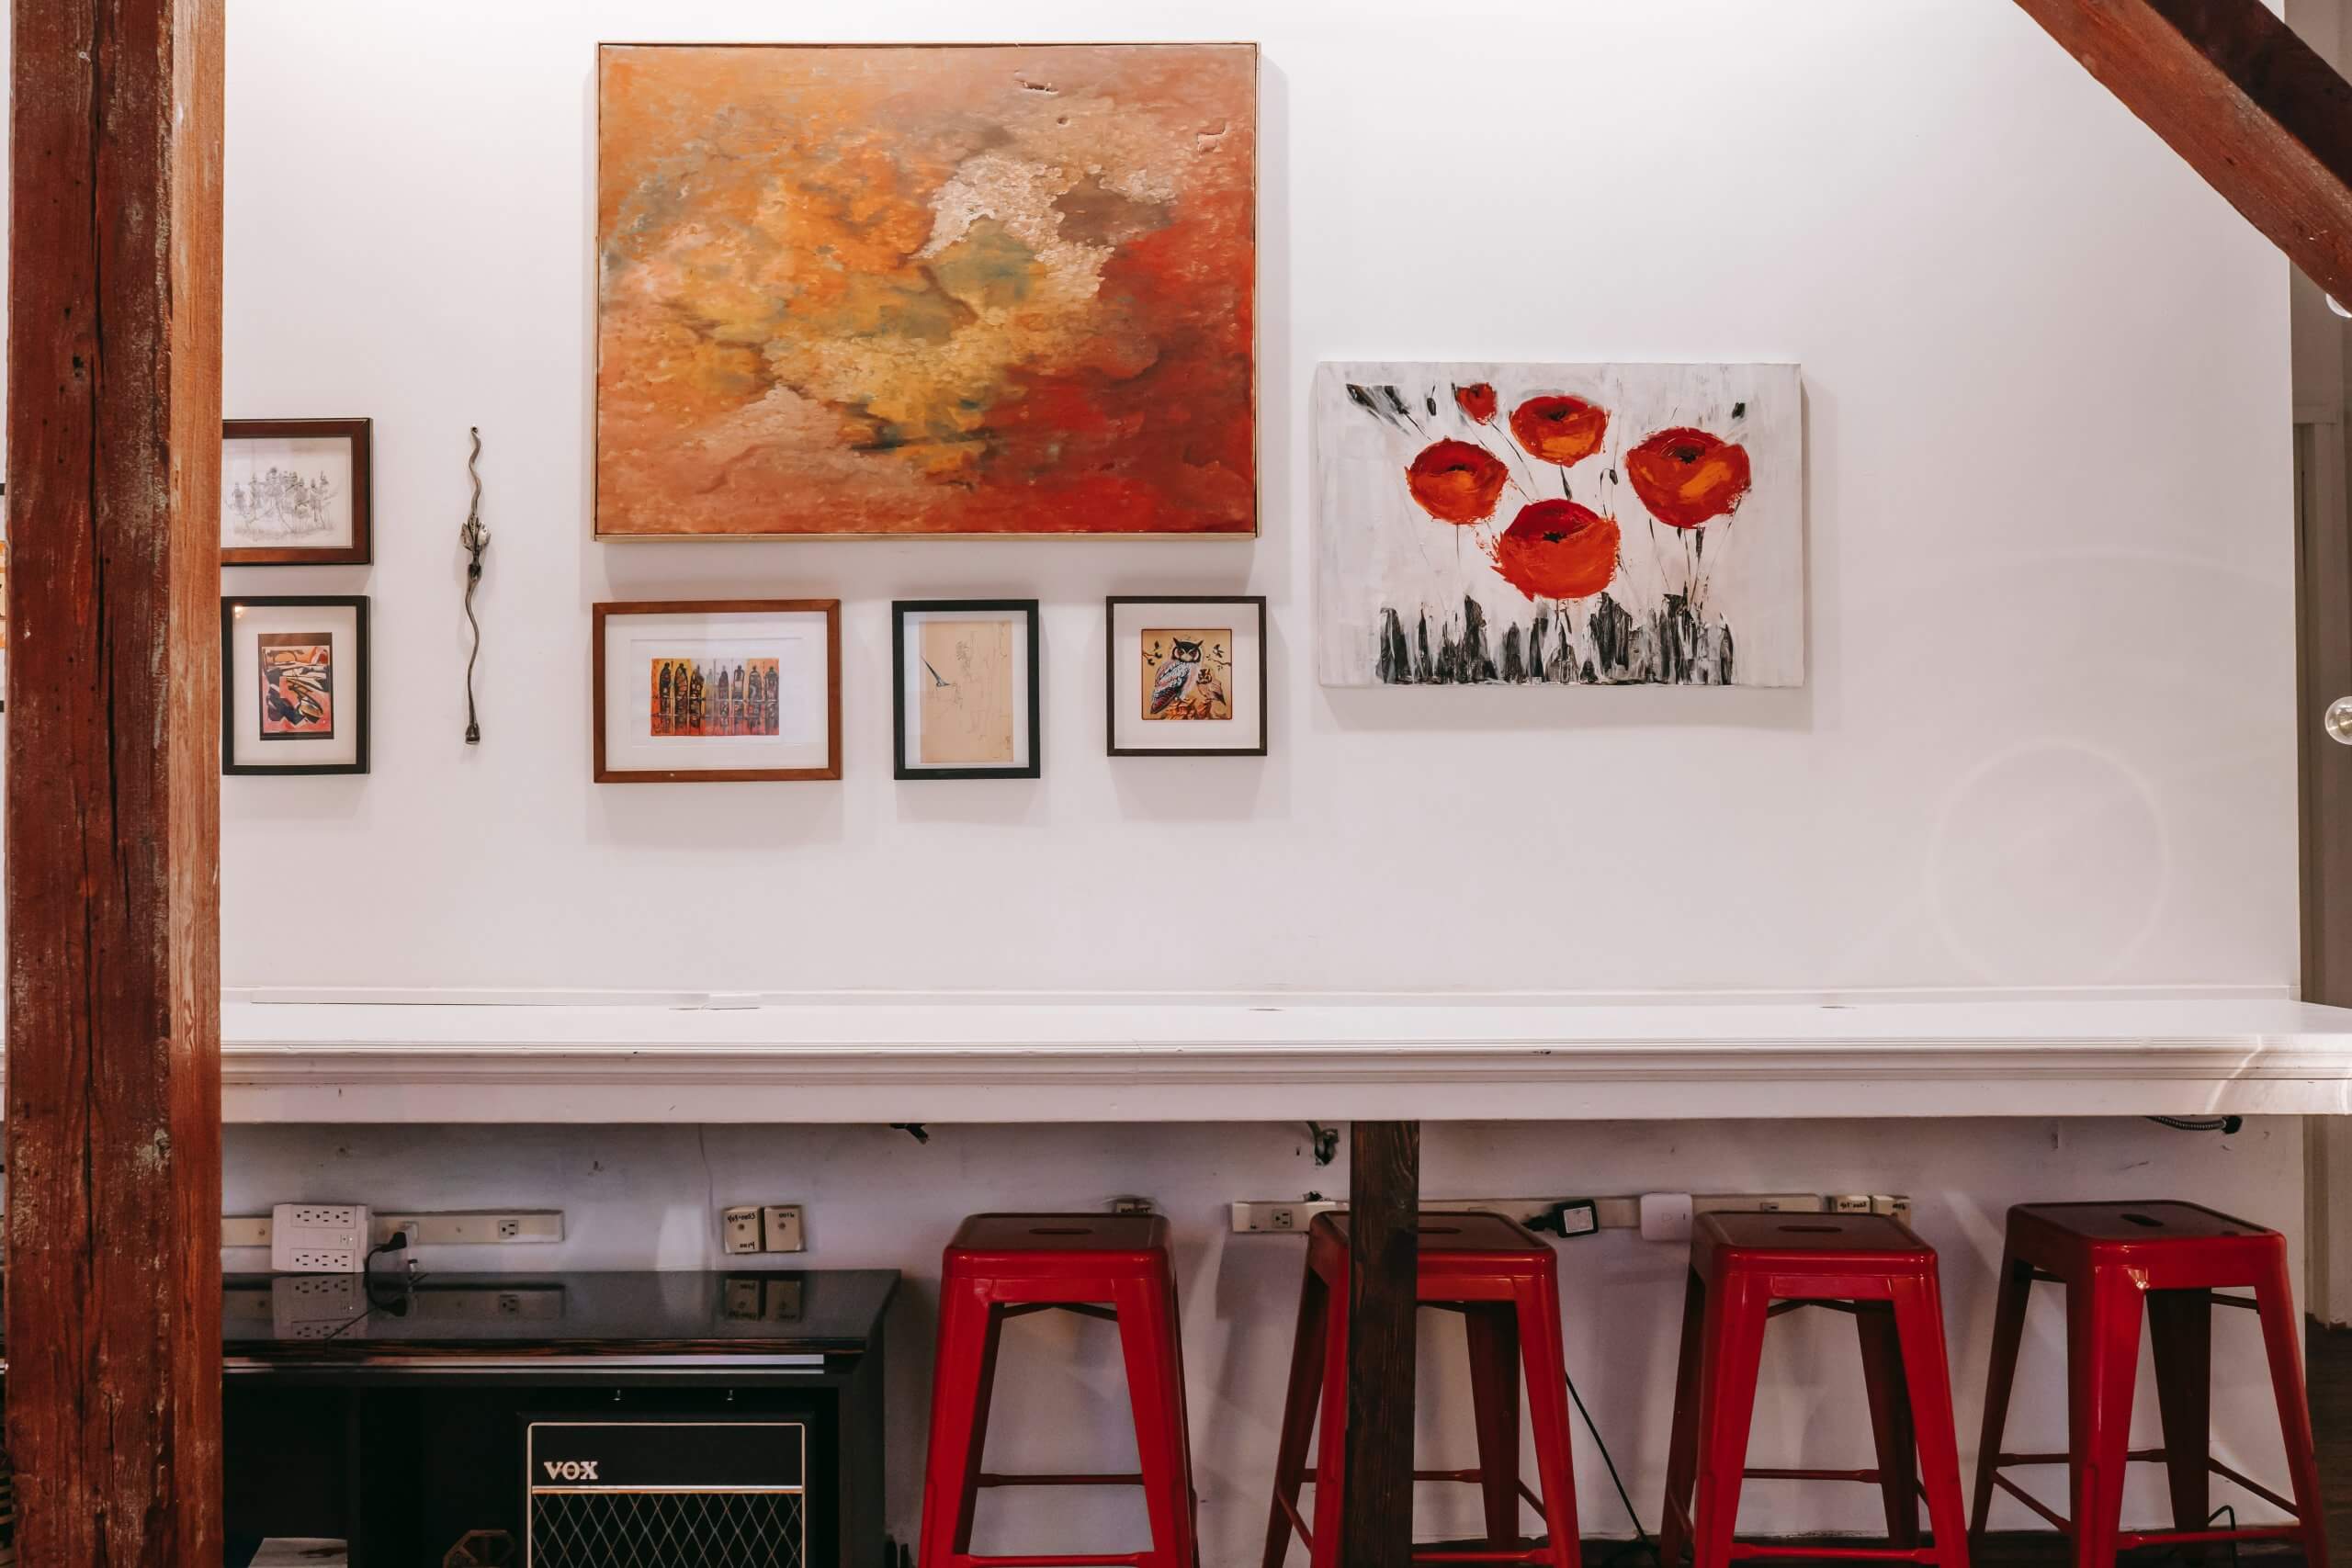 How to Decorate Your Home with Art Like a Pro